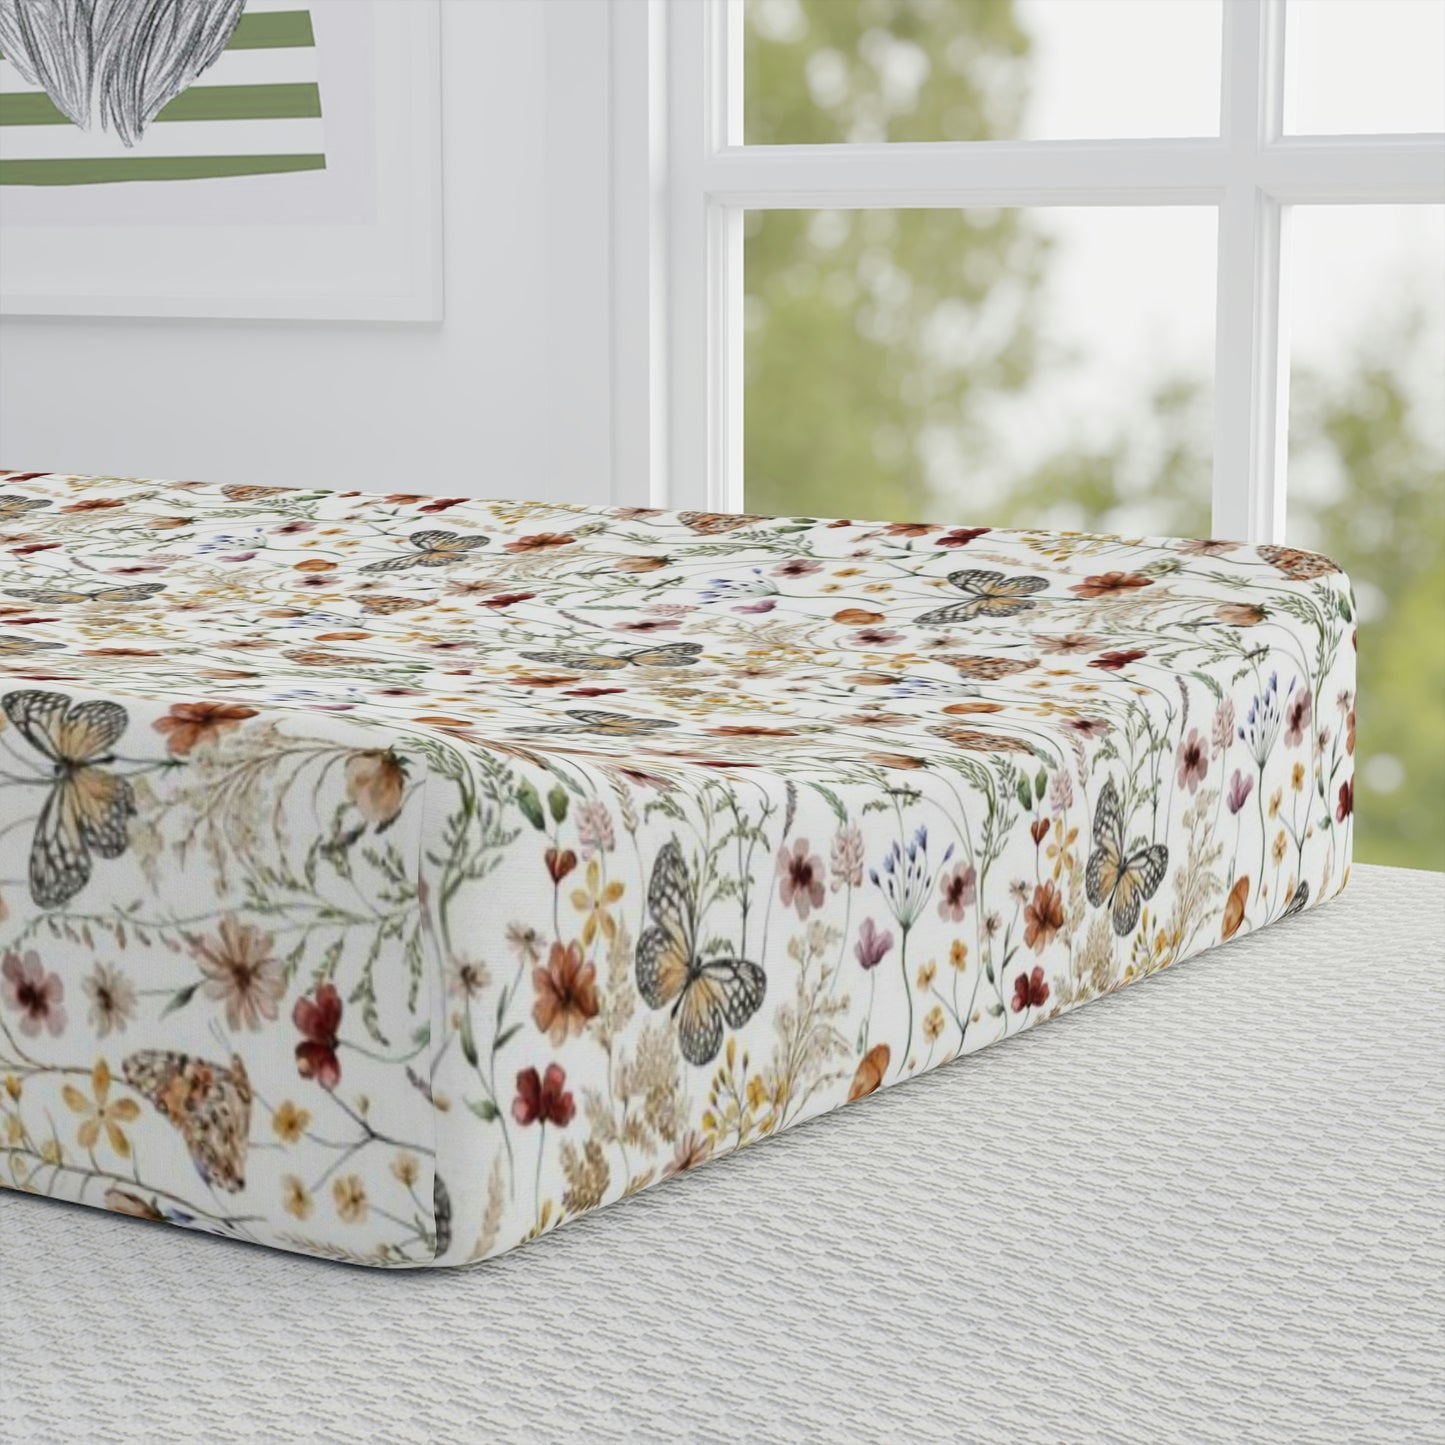 Butterfly floral Changing Pad Cover, Wildflower nursery bedding - Butterfly garden